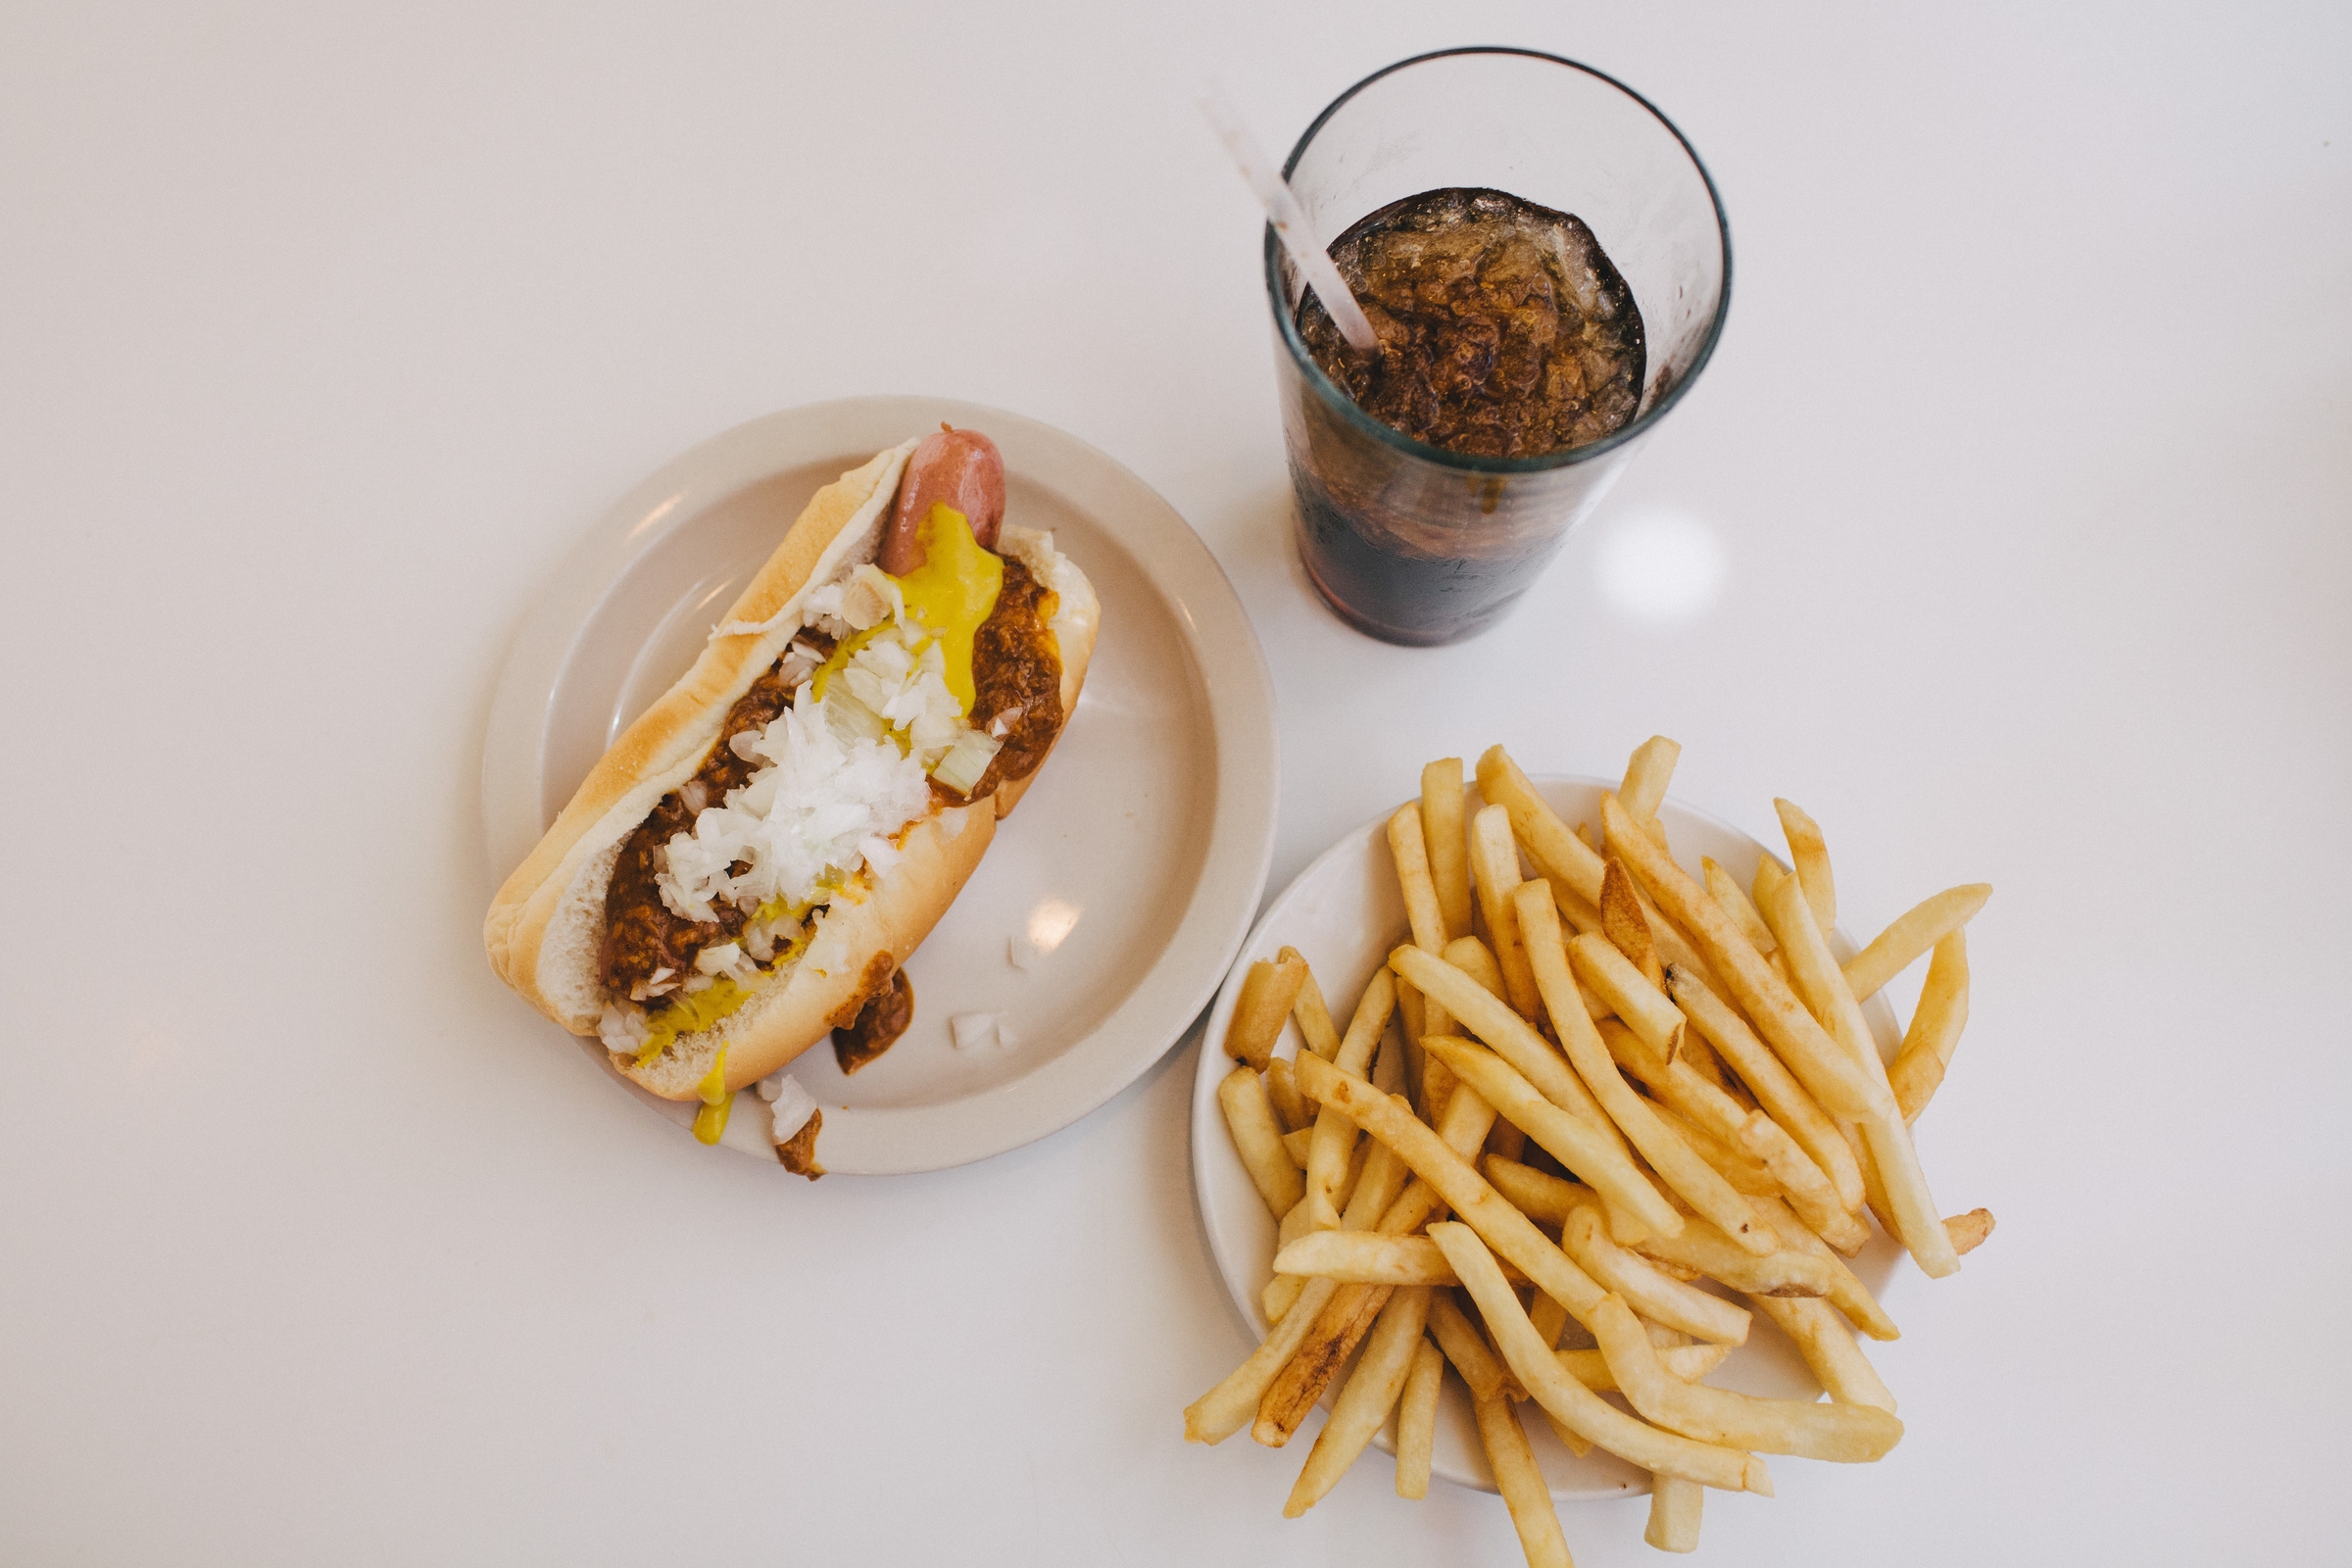 A coney dog, a plastic cup of brown cola, and a plate of french fries on a white countertop.